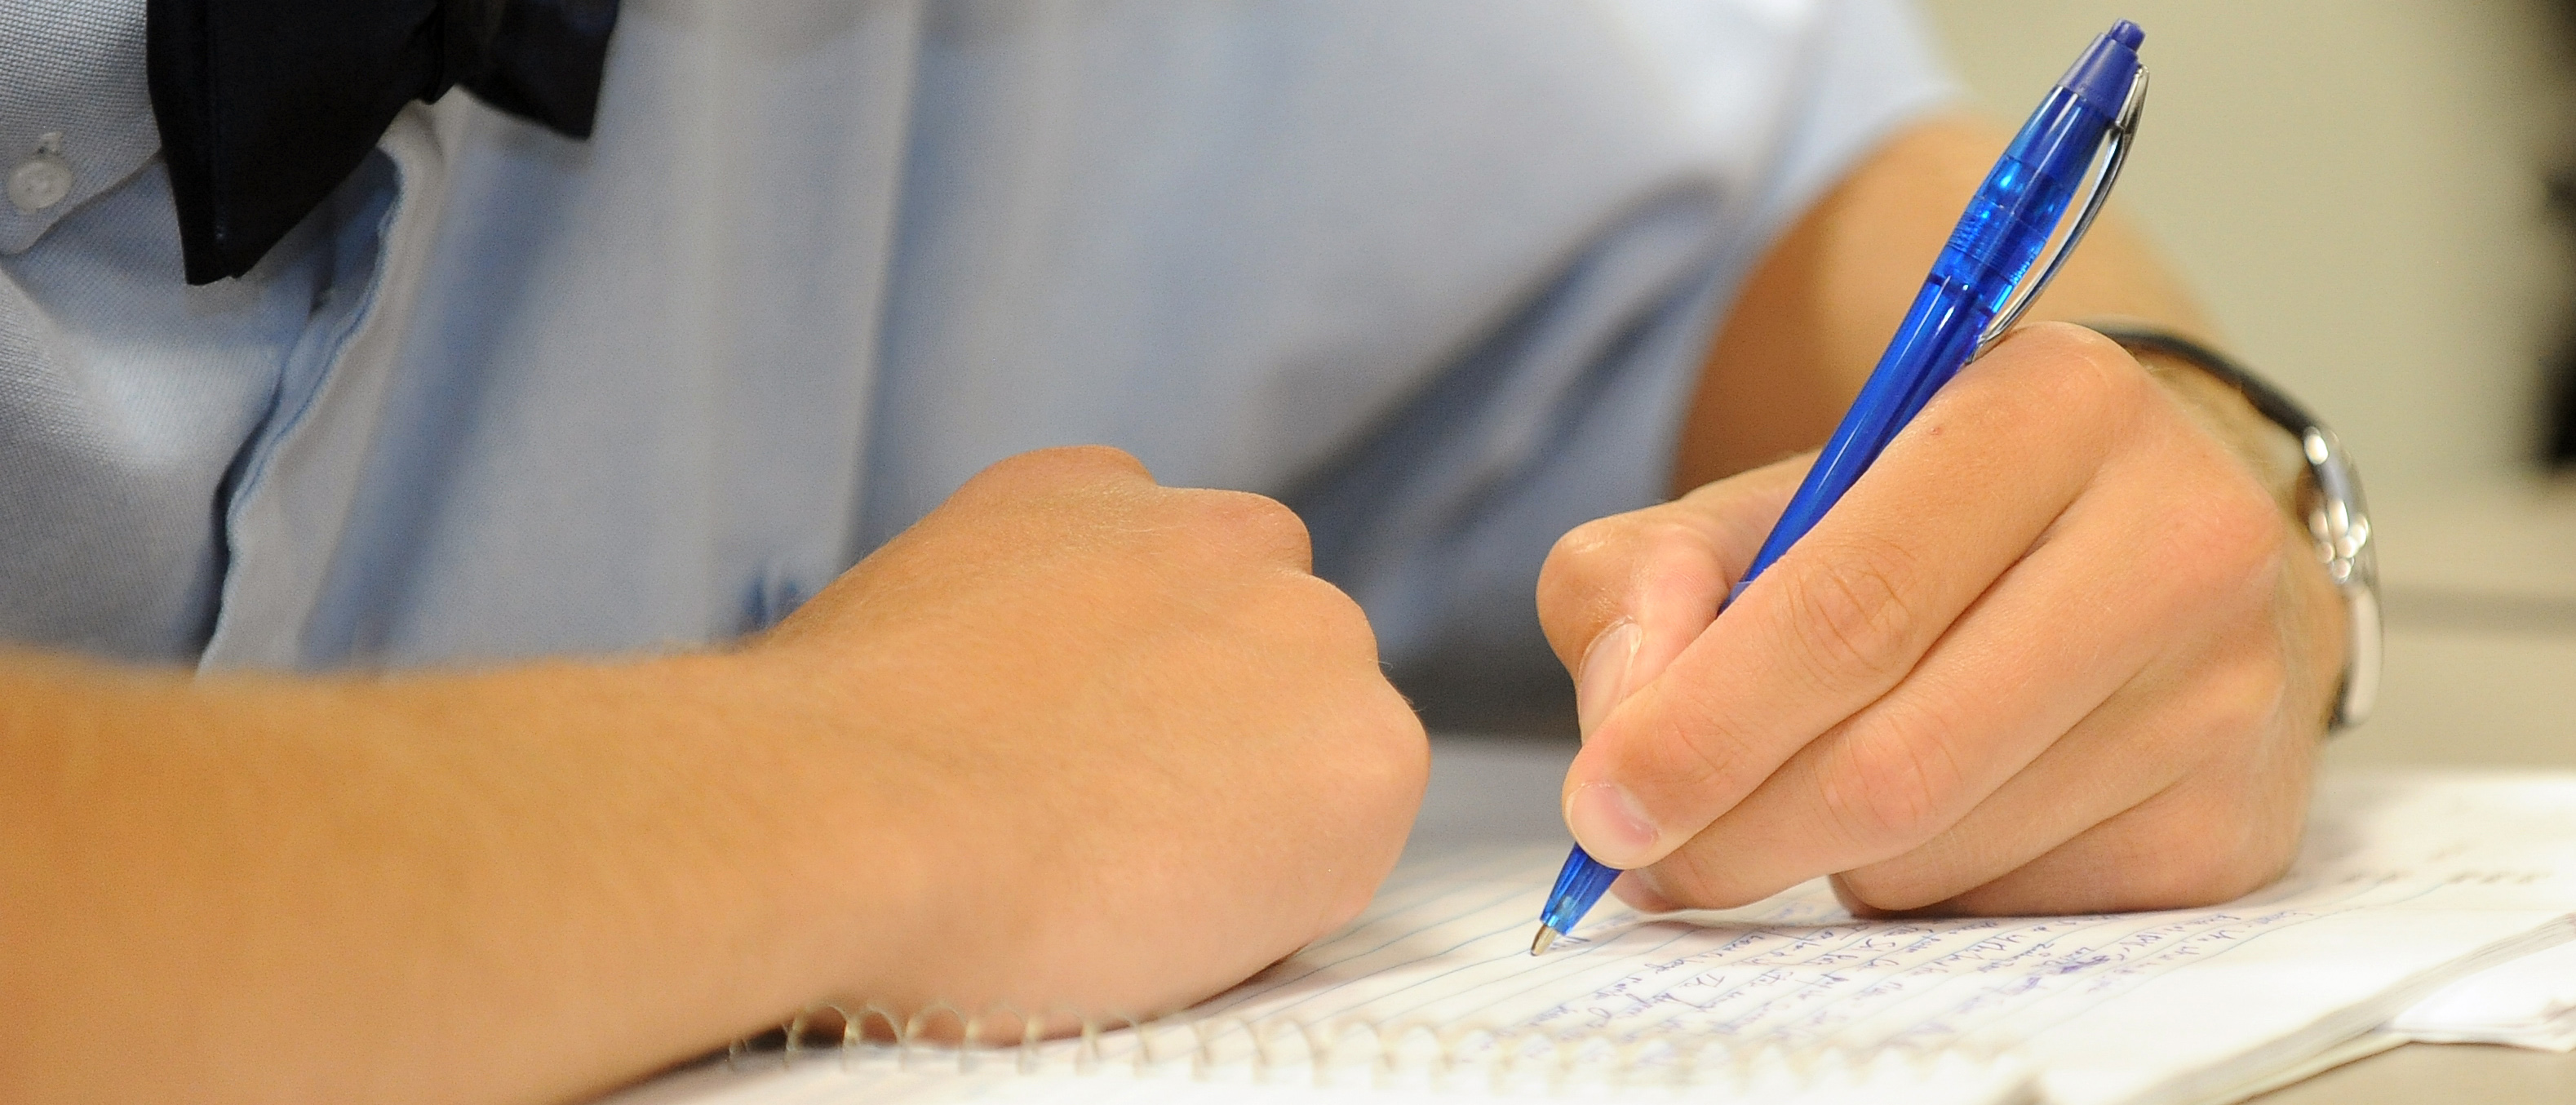 Student's arms leaning on desk and writing in a spiral notebook with a blue pen